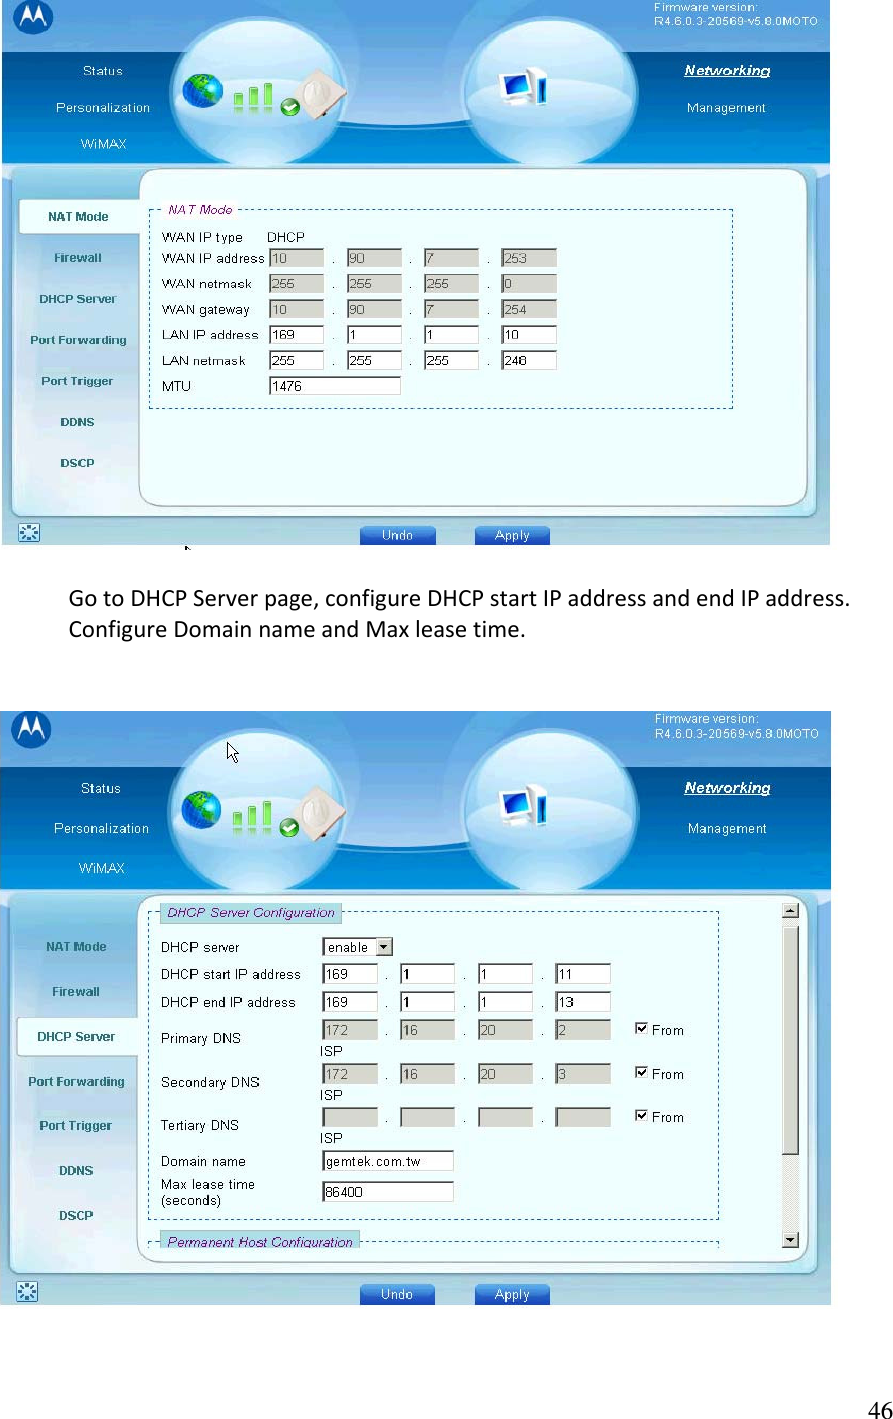   GotoDHCPServerpage,configureDHCPstartIPaddressandendIPaddress.ConfigureDomainnameandMaxleasetime.     46